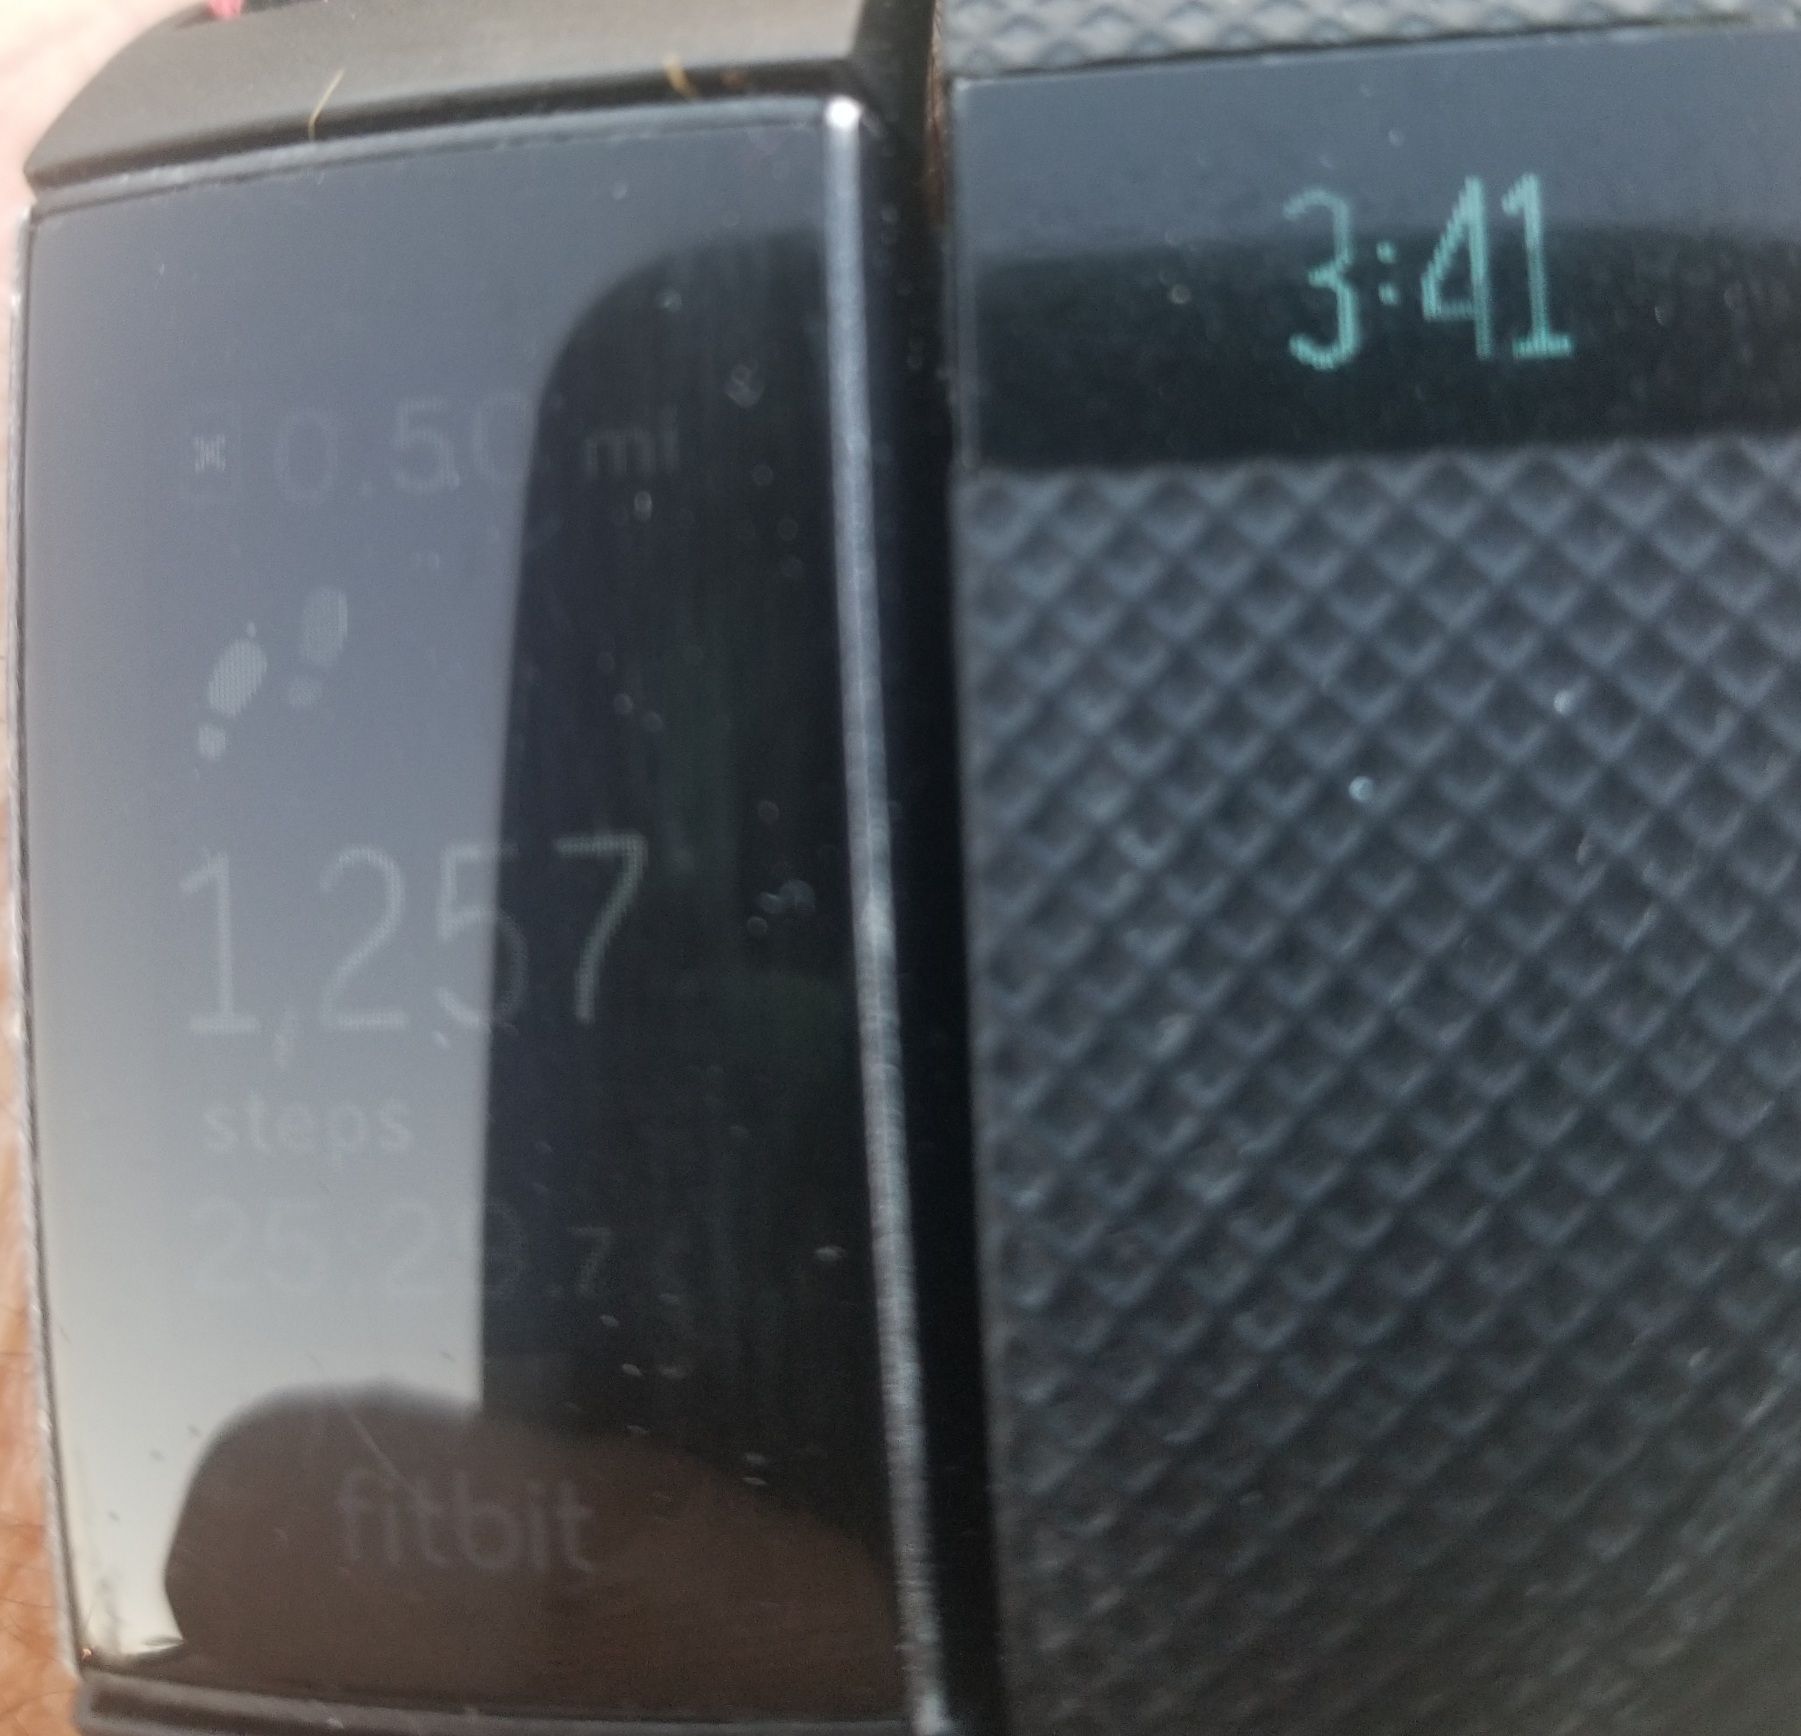 Charge 3 screen too dim - Fitbit Community